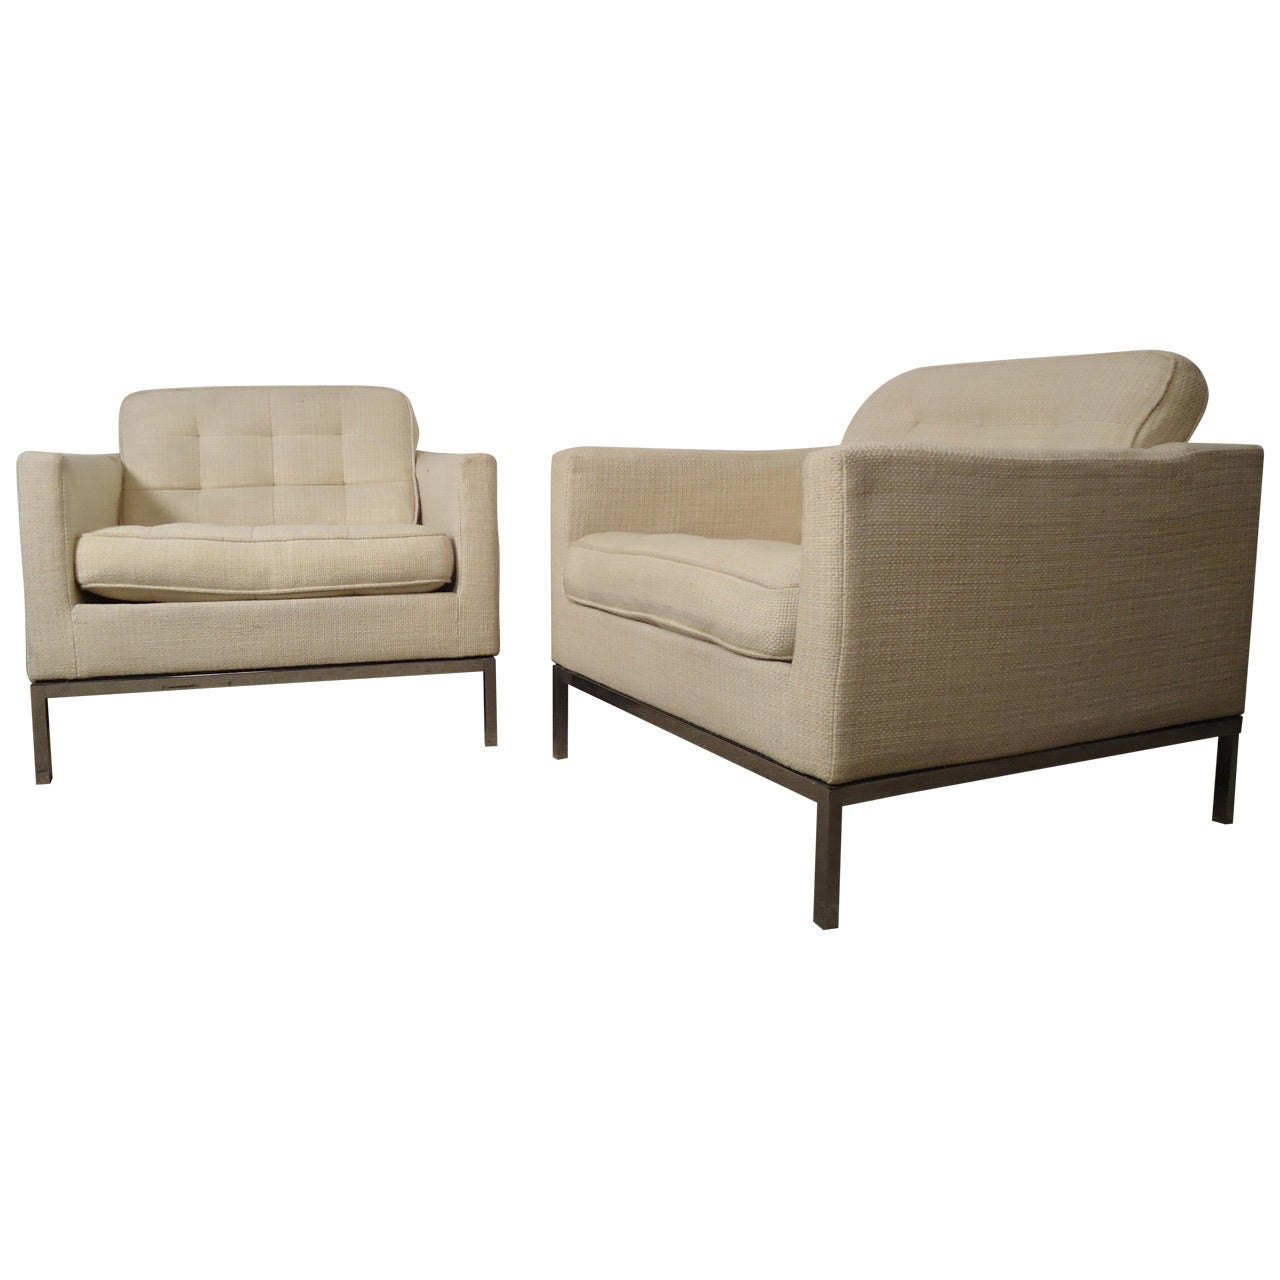 Vintage pair of comfortable armchairs designed by Knoll Associates.
Chairs feature off-white tufted upholstery and sleek polished chrome legs.
Both chairs come with optional arm protecting covers. 

(Please confirm item location - NY or NJ -